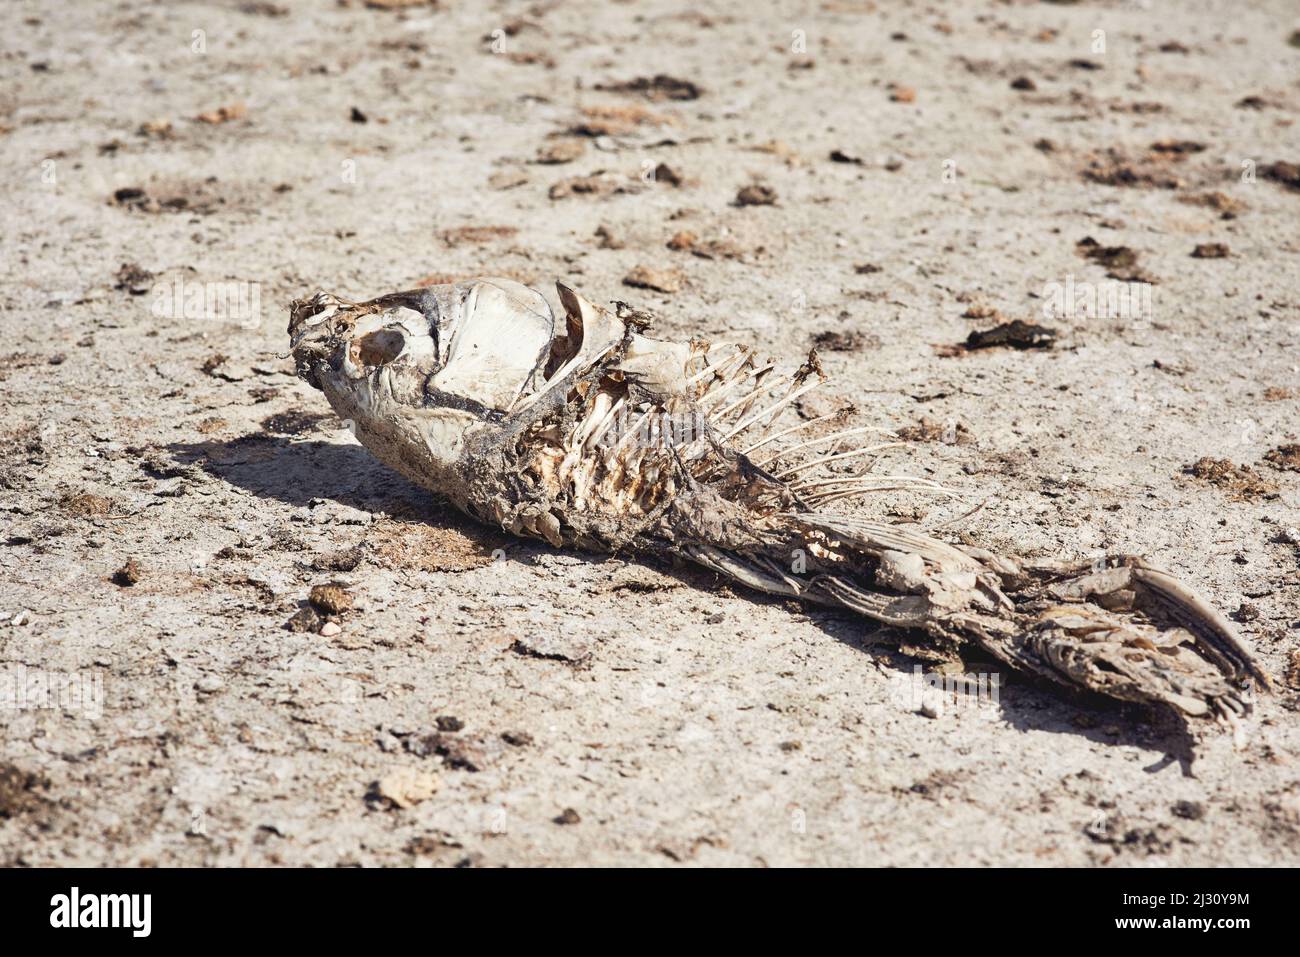 This is the result when there is no more water. Shot of a deceased fish lying on a patch of dry ground during the day where a dam use to be. Stock Photo